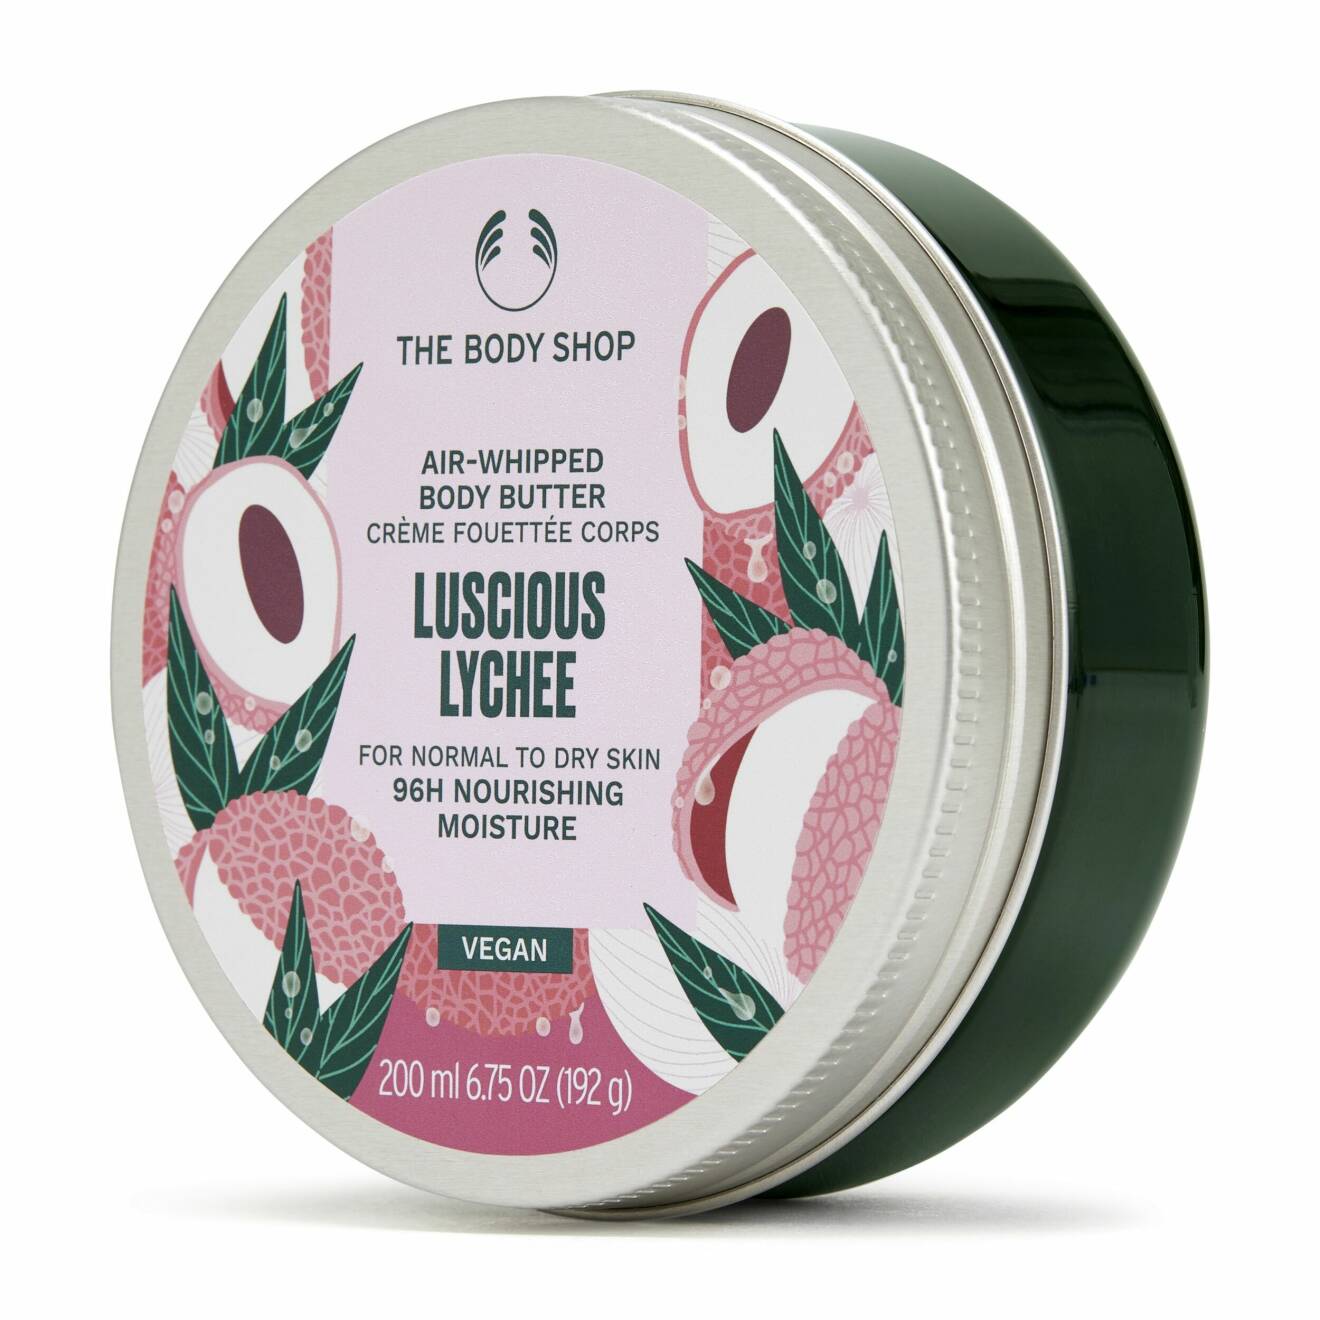 Luscious Lychee Air-Whipped Body Butter, The Body Shop